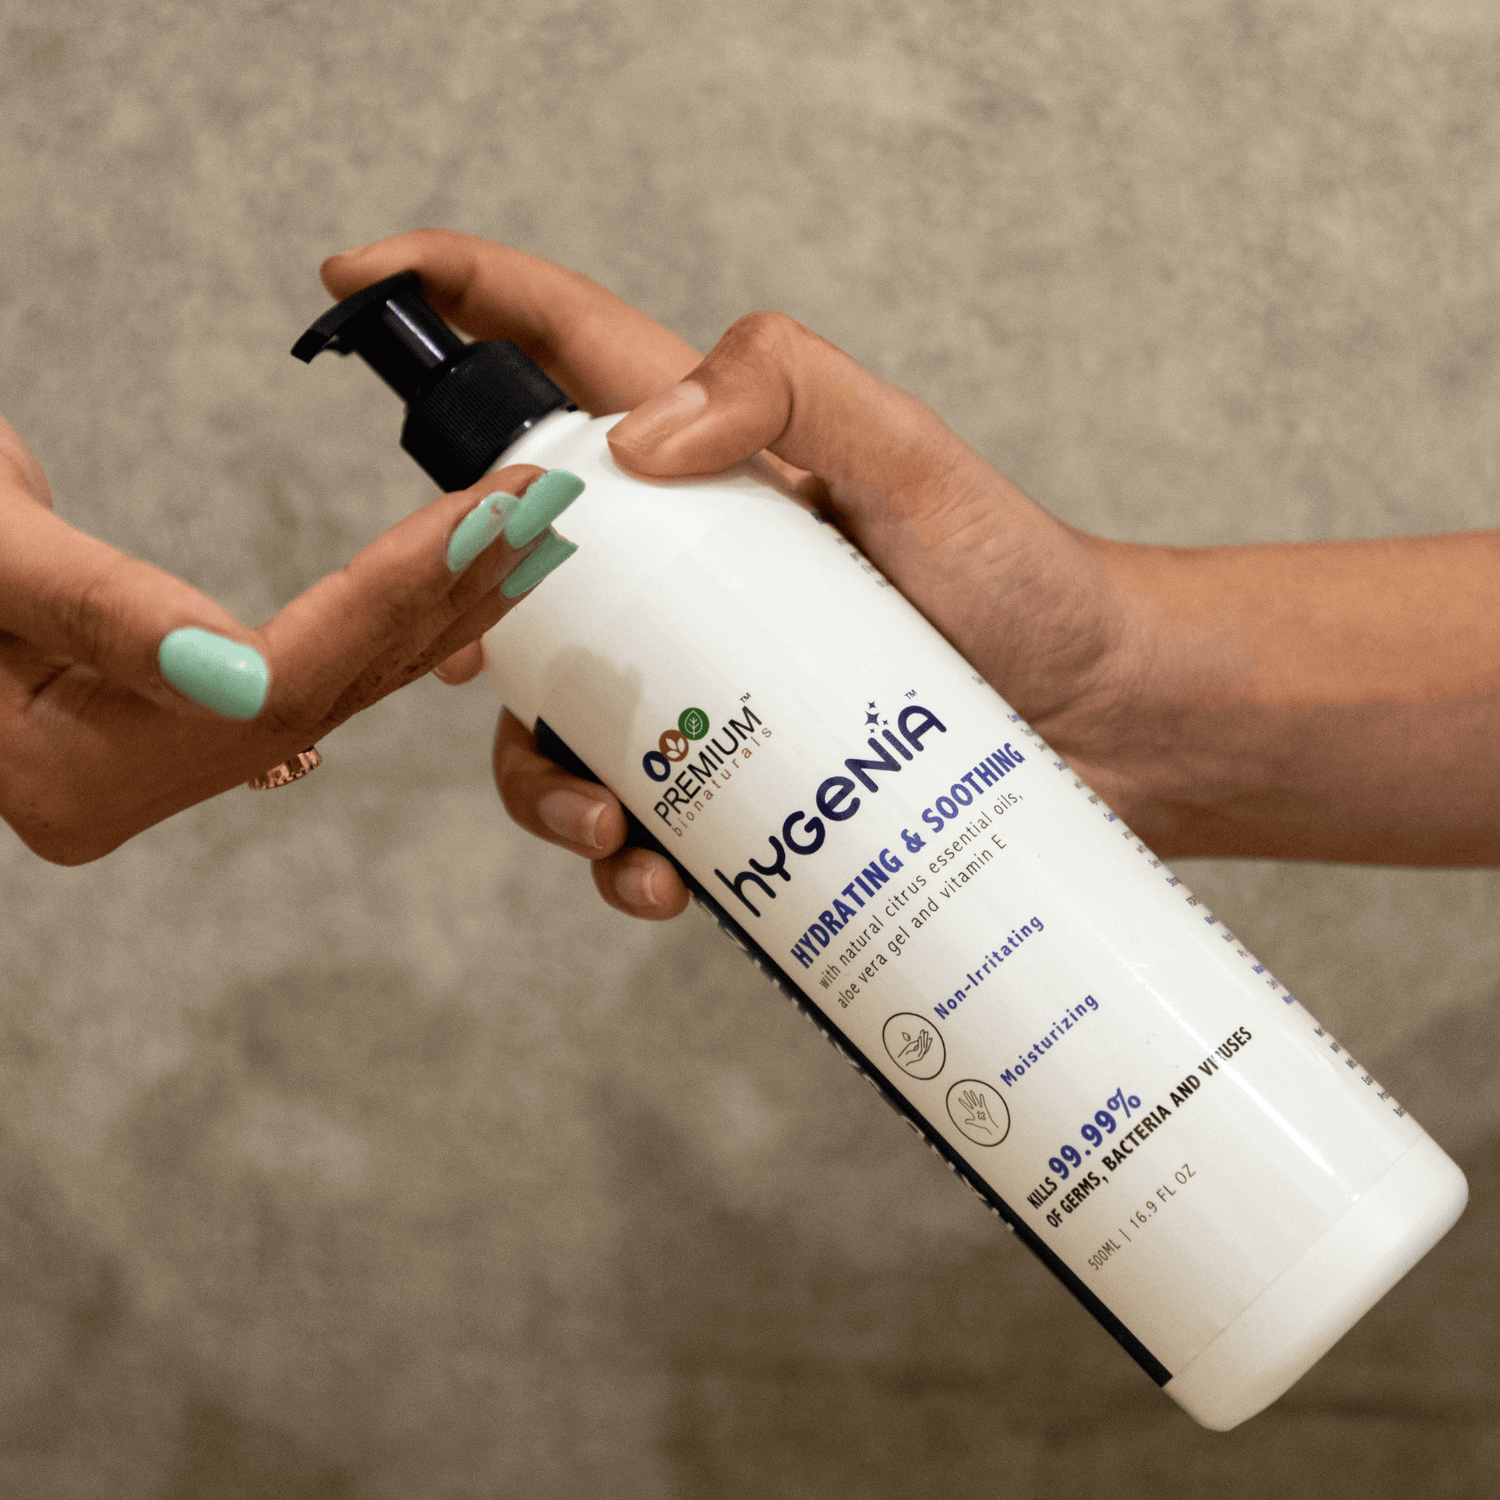 Premium Bionaturals offers a potent and safe hand sanitizer solution.